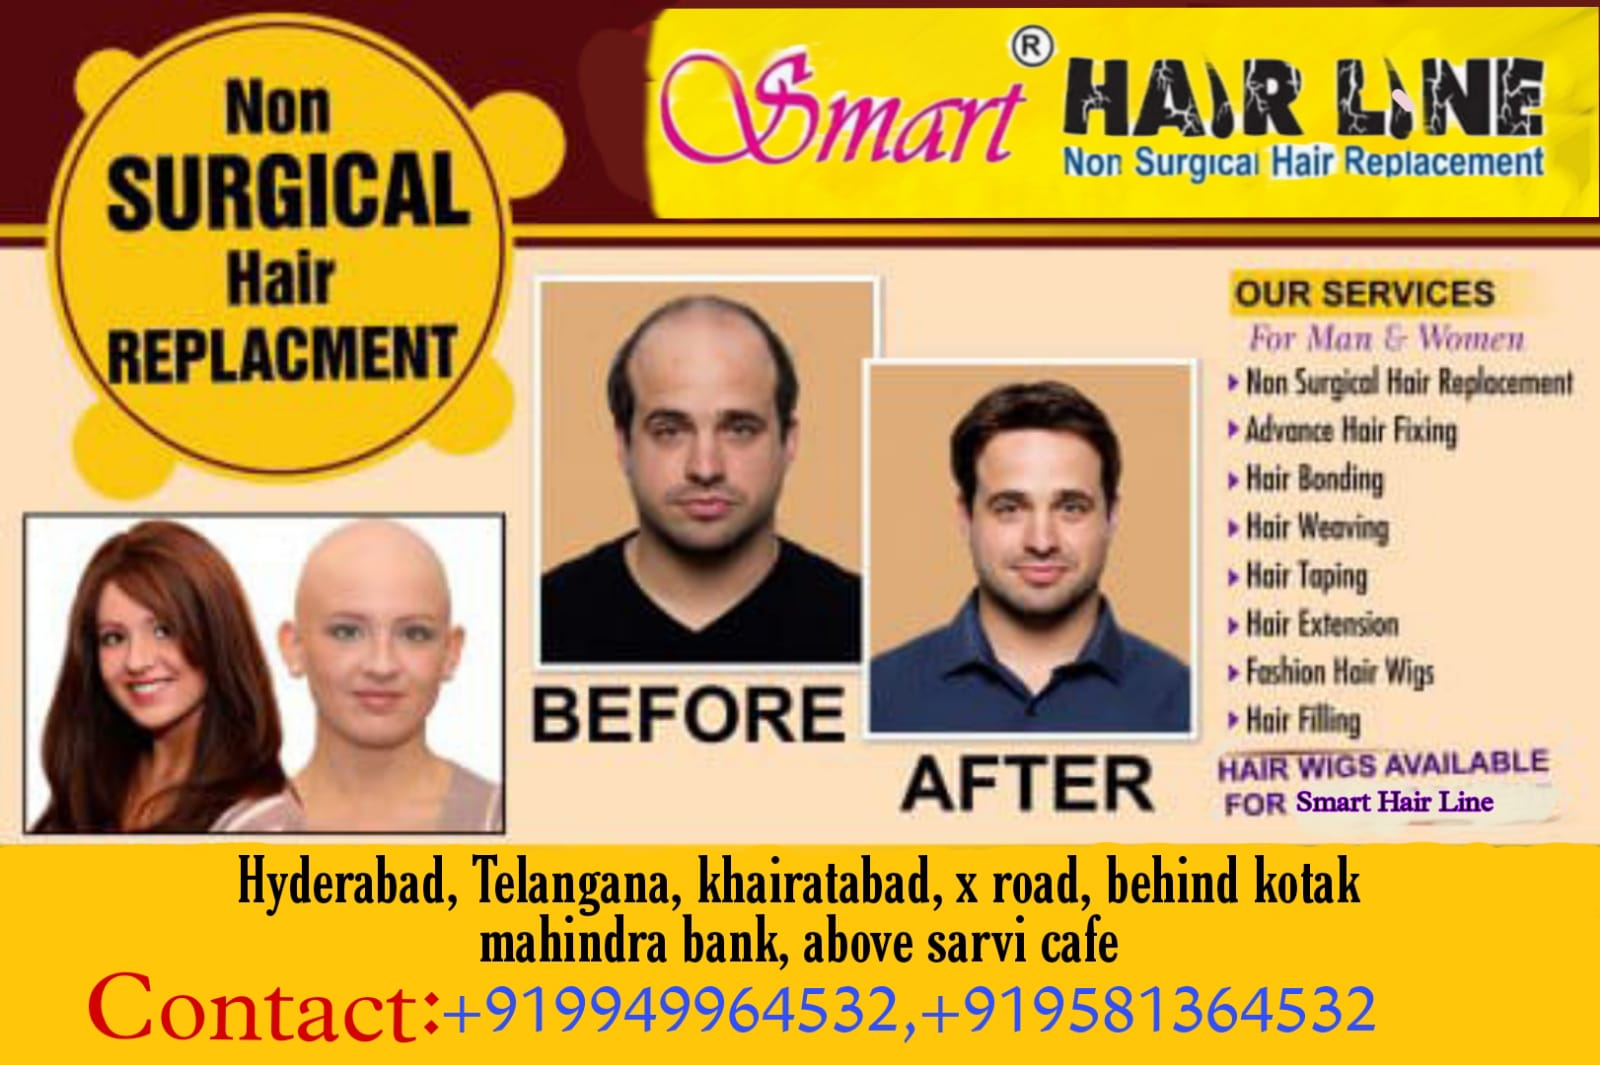 Hair Fixing Services in Hyderabad, Bald Treatment | Sulekha Hyderabad